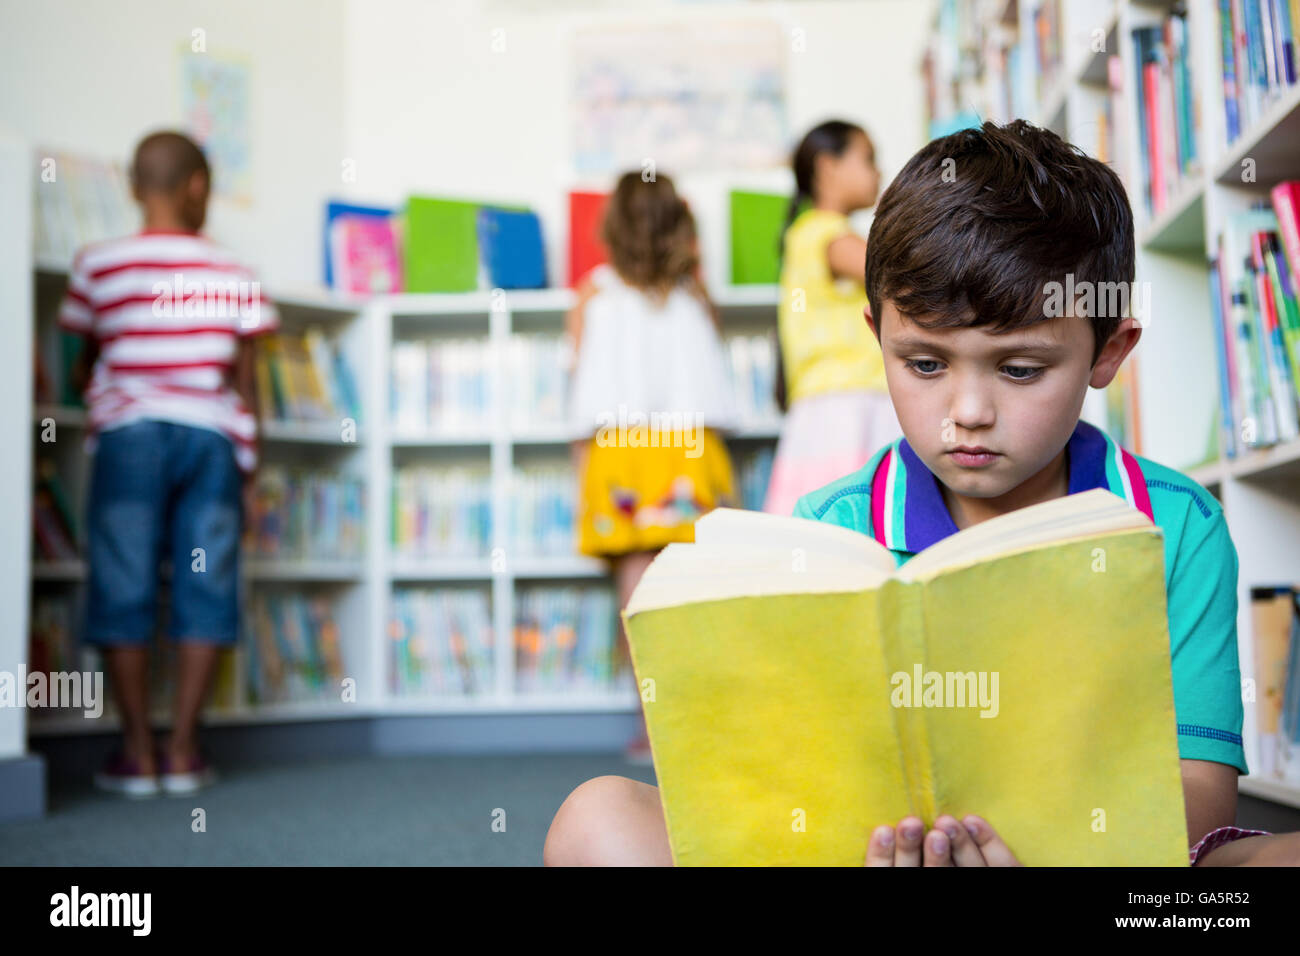 Elementary boy reading book at school library Stock Photo